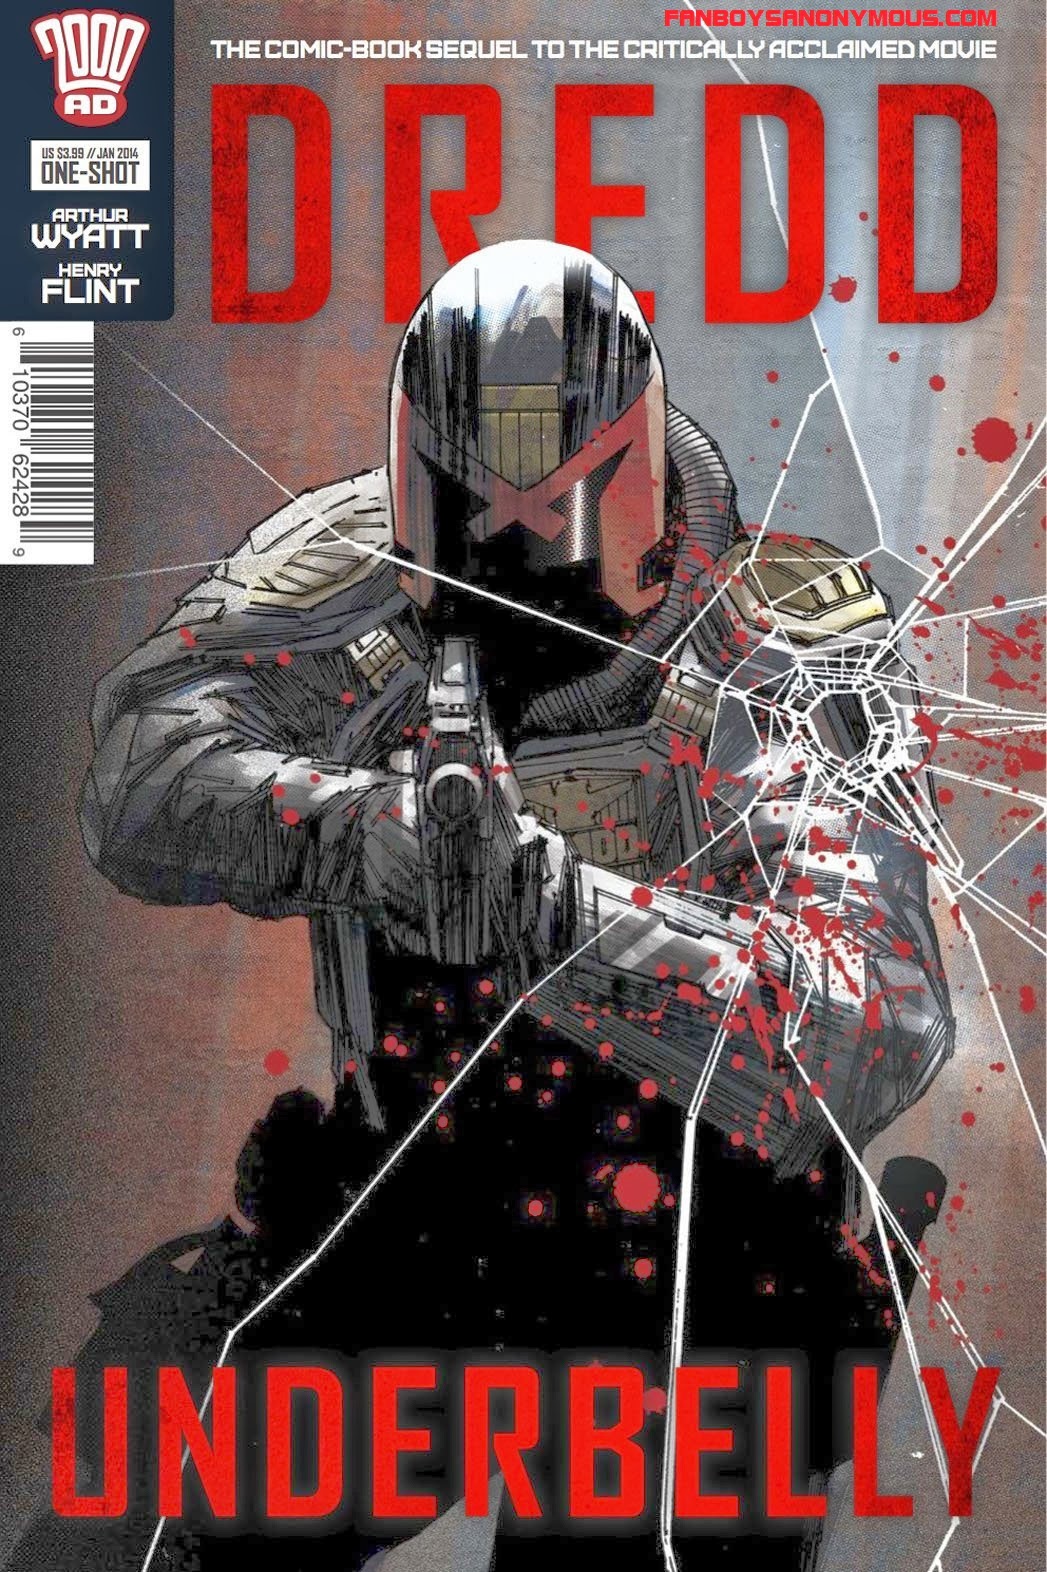 2000AD comic book sequel to the 2012 movie Dredd sells out in 48 hours